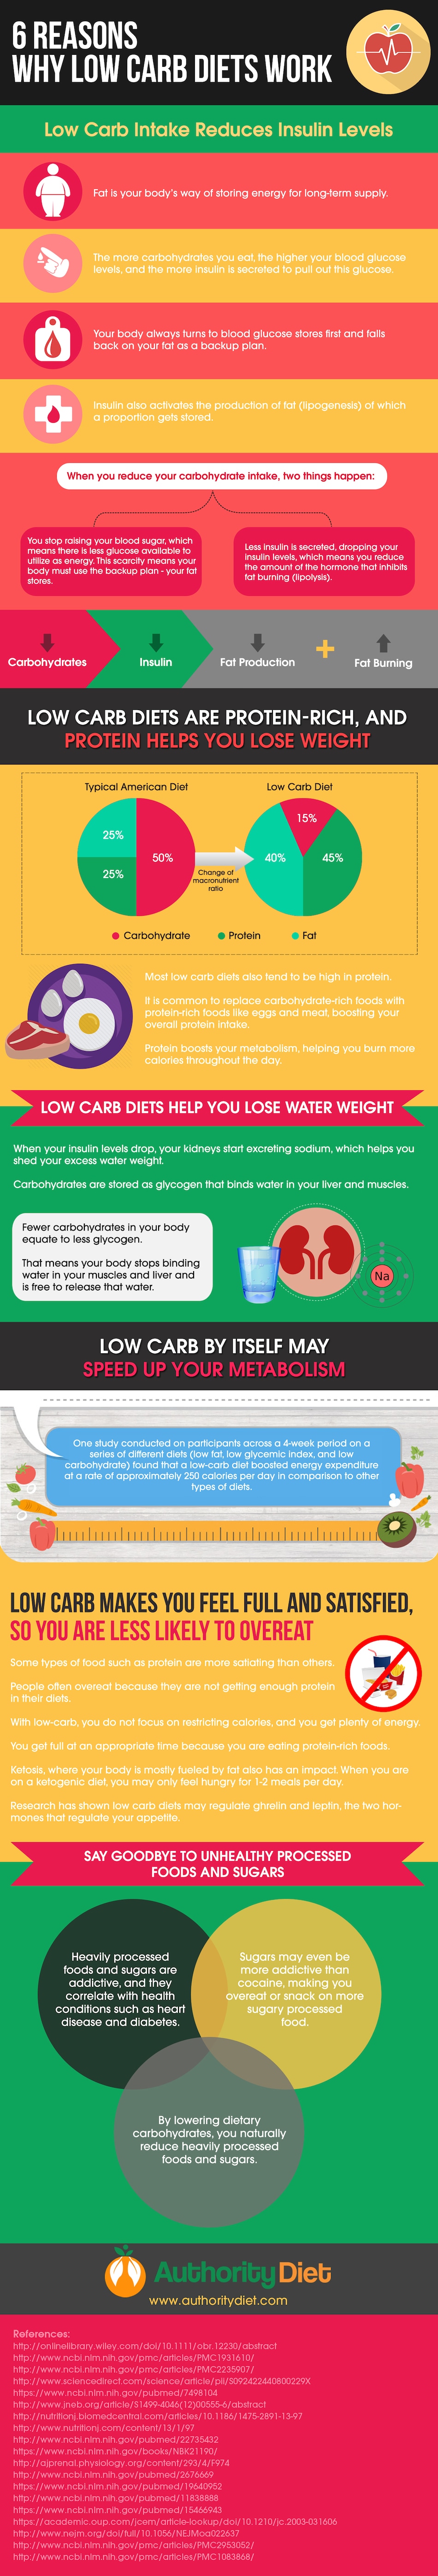 an info graphic titled 6 reasons why low carb diets work